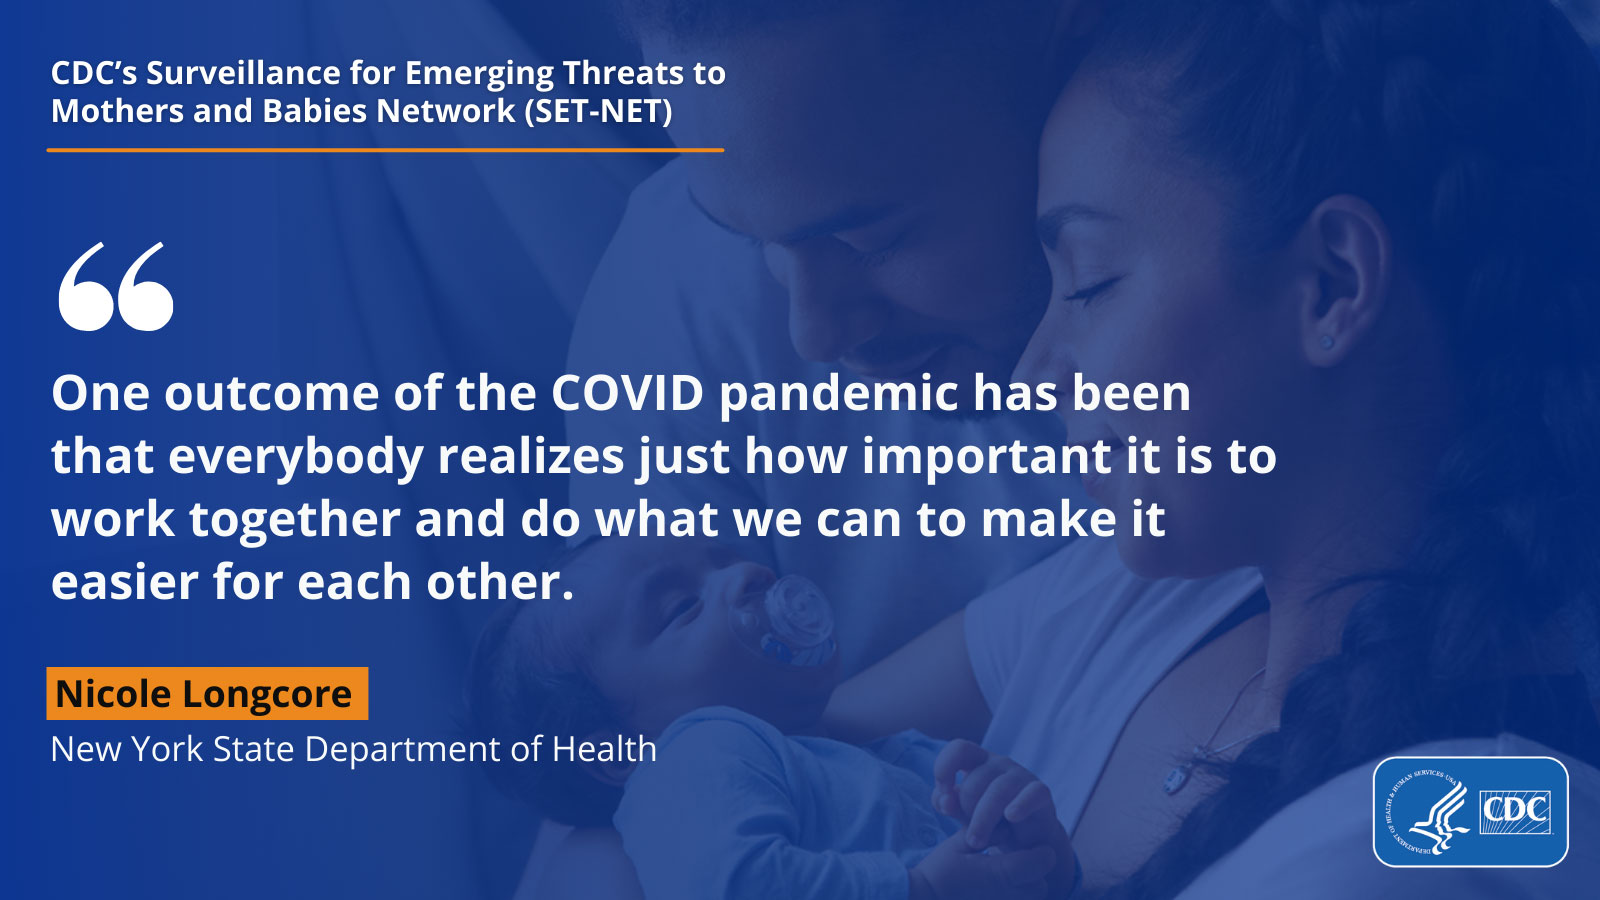 One outcome of the COVID pandemic has been that everybody realizes just how important it is to work together and do what we can to make it easier for each other. Nicole Longcore, New York State Department of Health